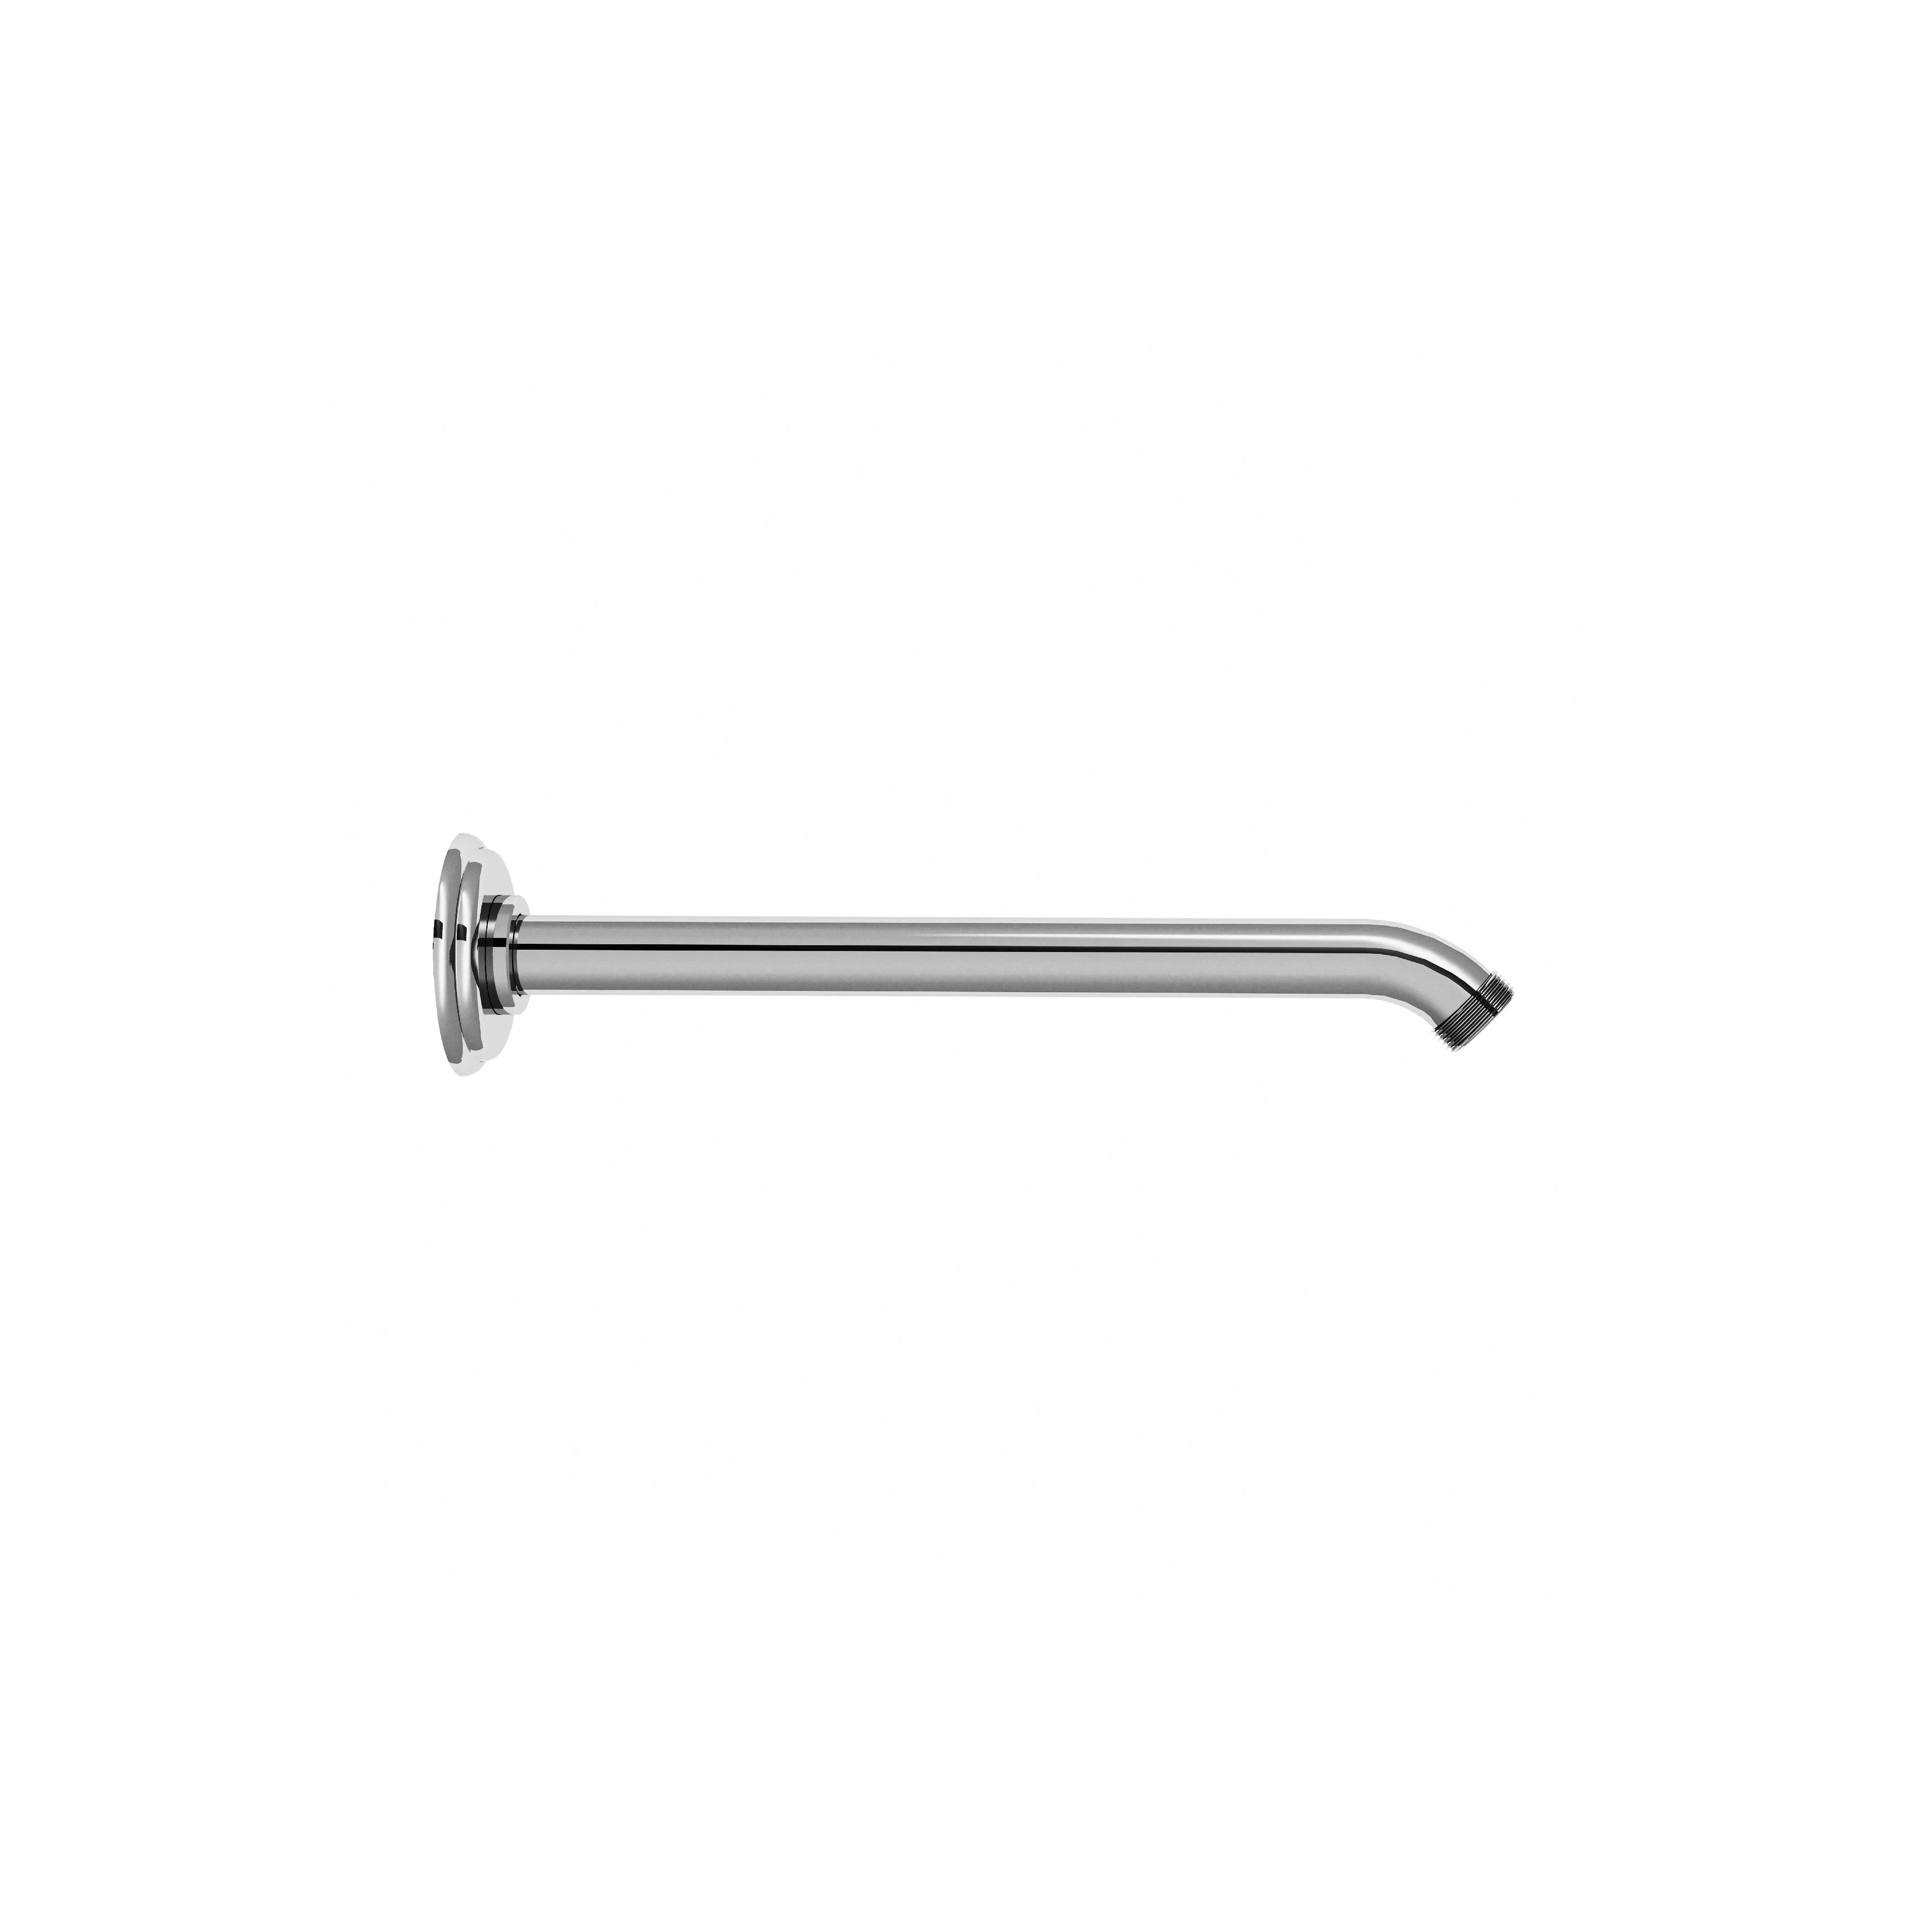 M04-2W170 Wall mounted shower arm 170mm